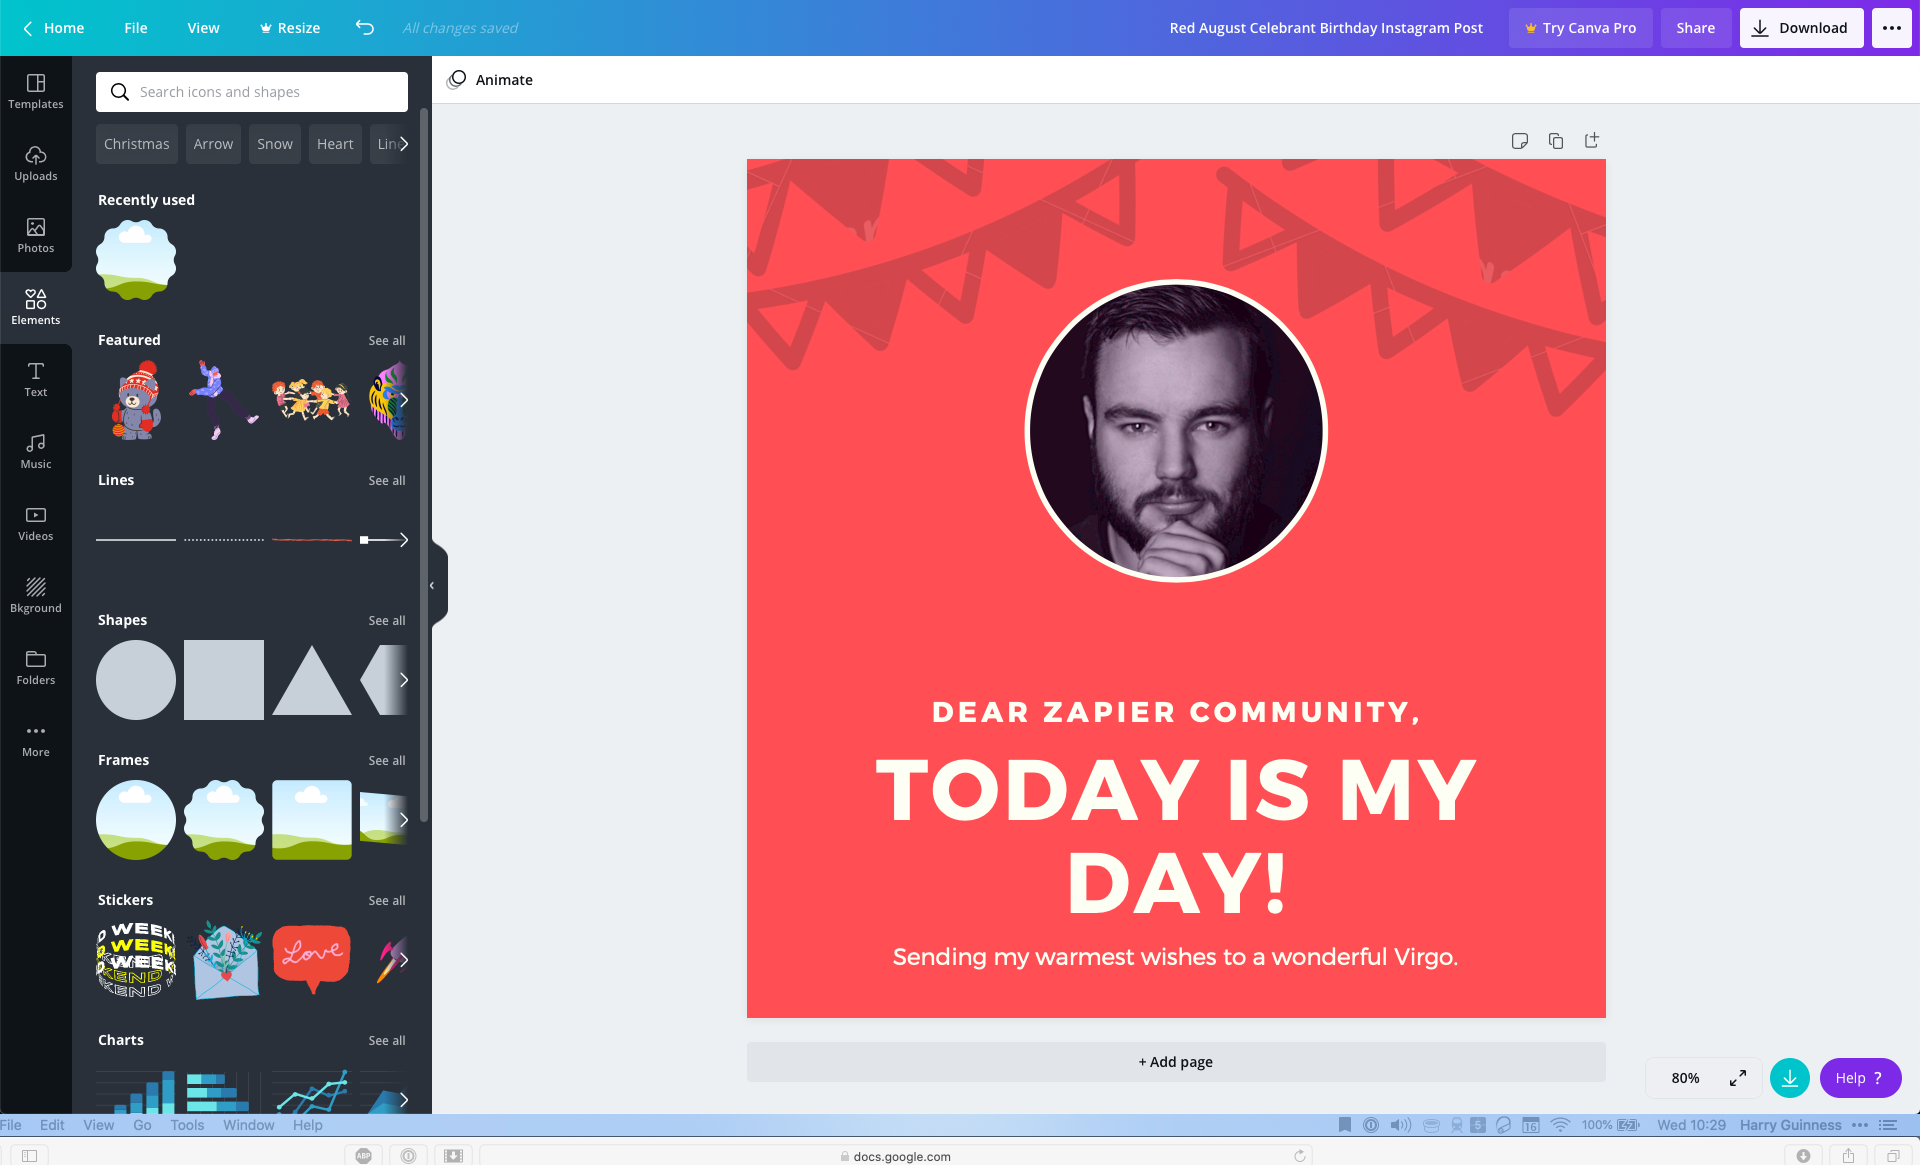 Download The 5 Best Free Design Tools To Create Social Media Graphics In 2021 Zapier